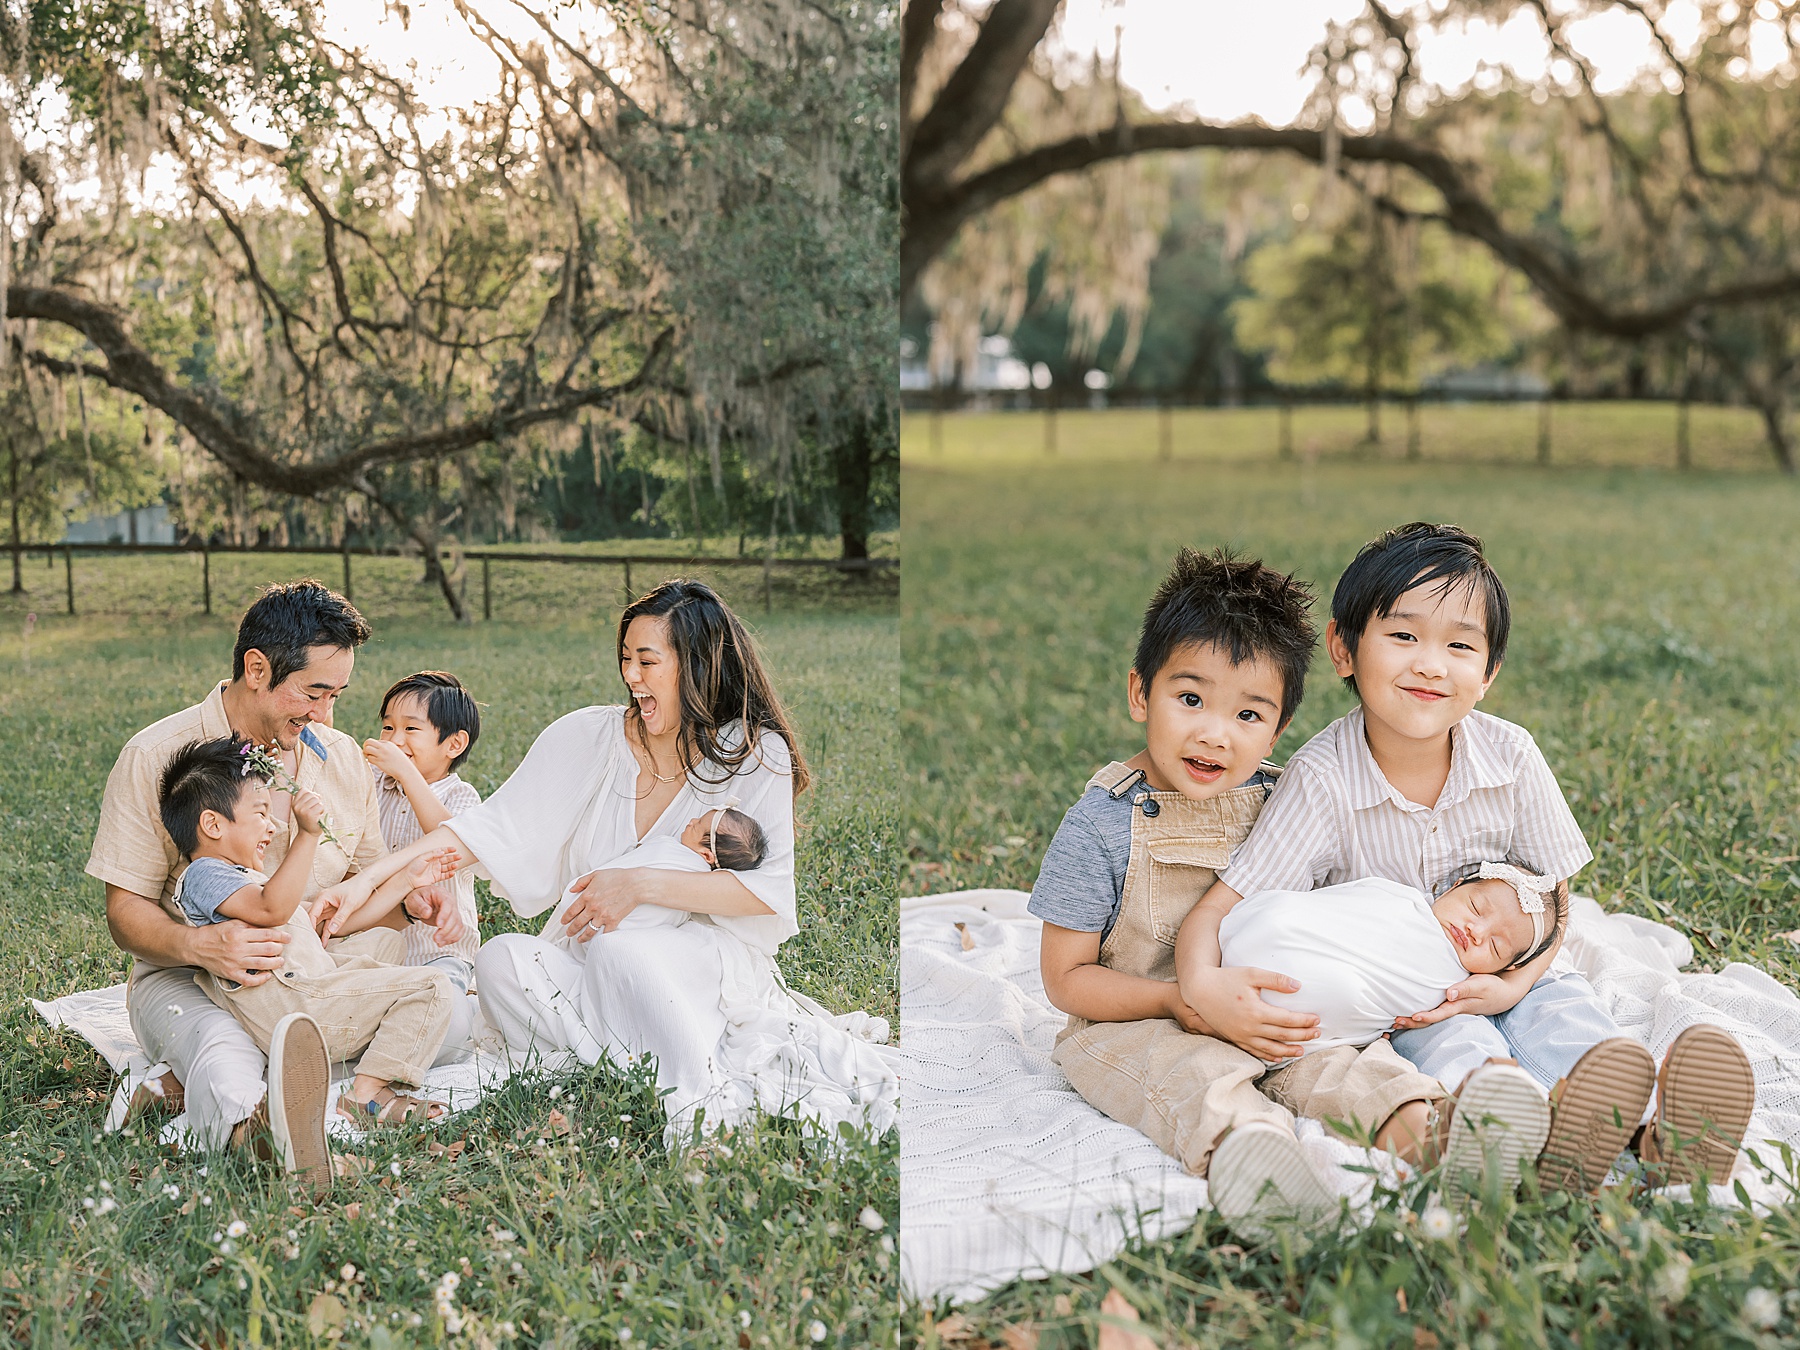 family sitting in the grassy field at sunset holding newborn baby girl